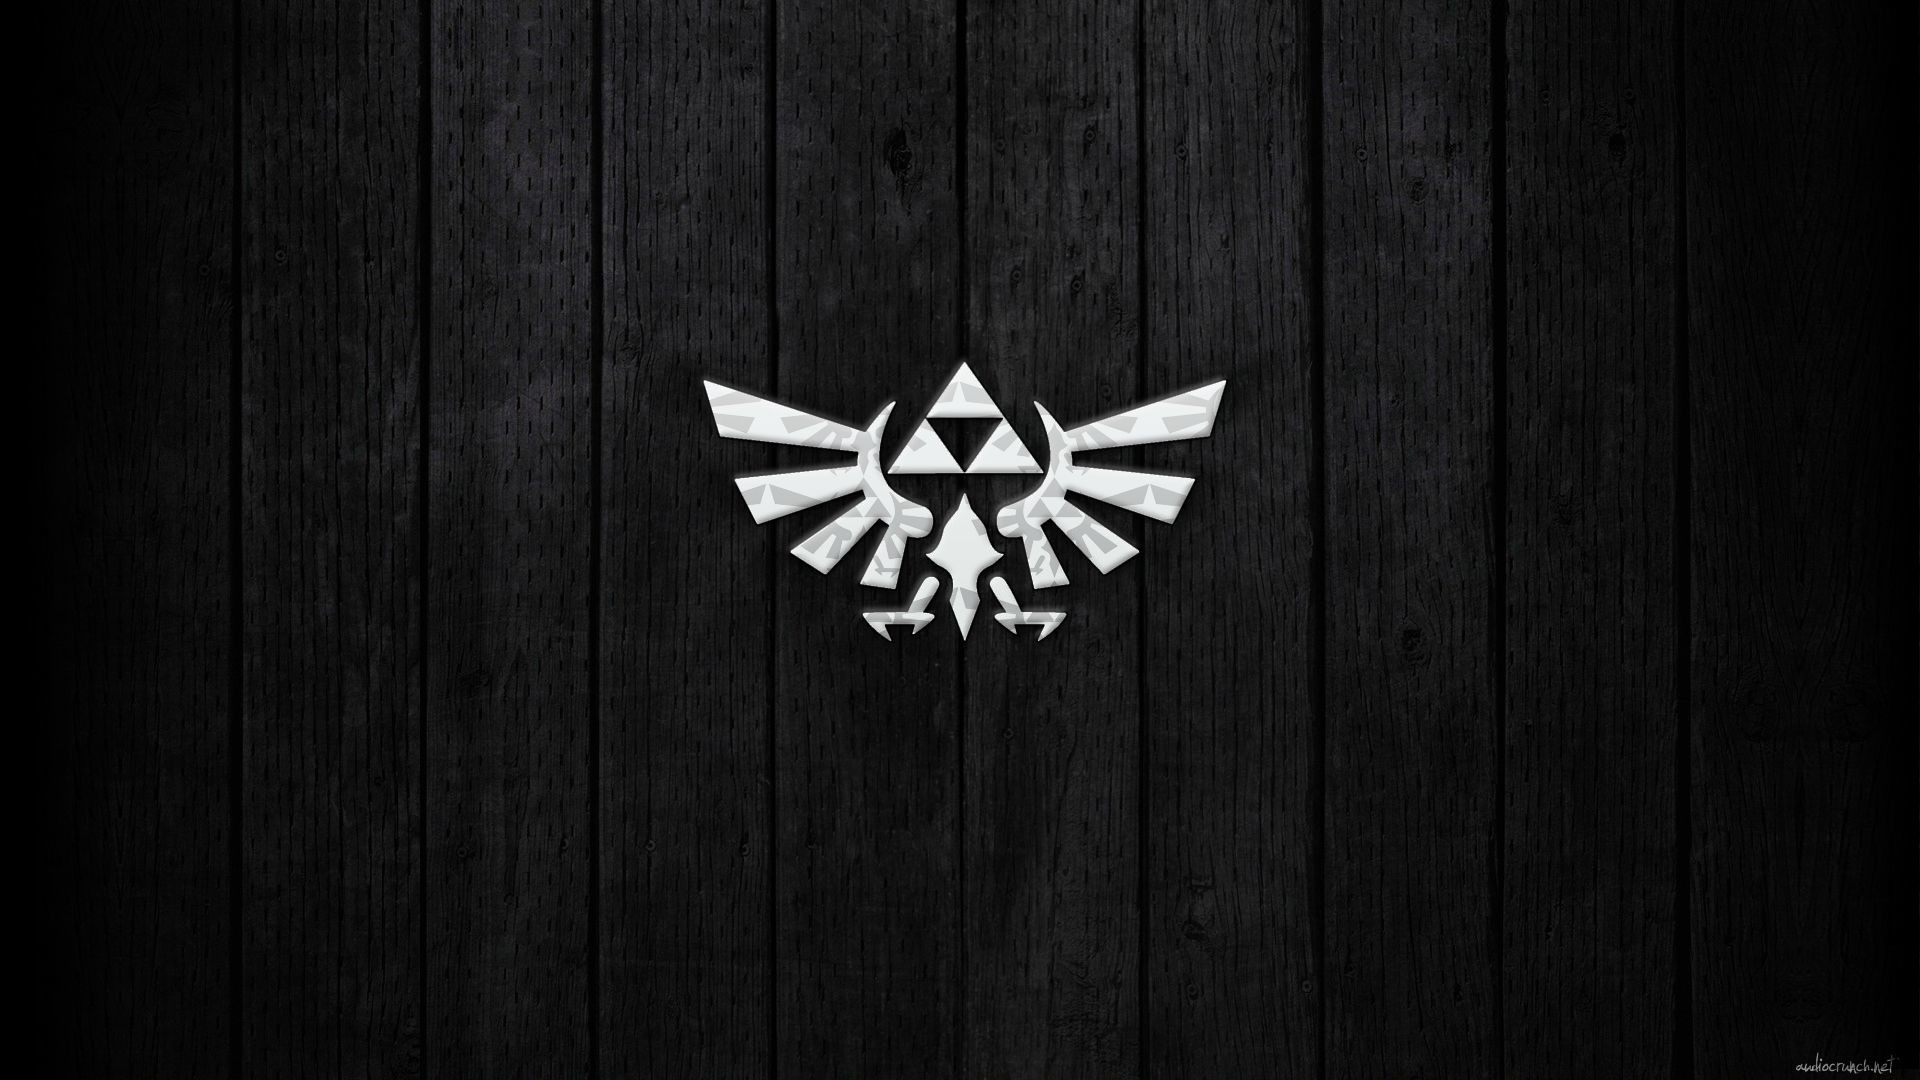 1920x1080 I like dark minimal wallpapers. I also like anything to do with Zelda. Made  this a while back, decided to share it with /r/zelda!